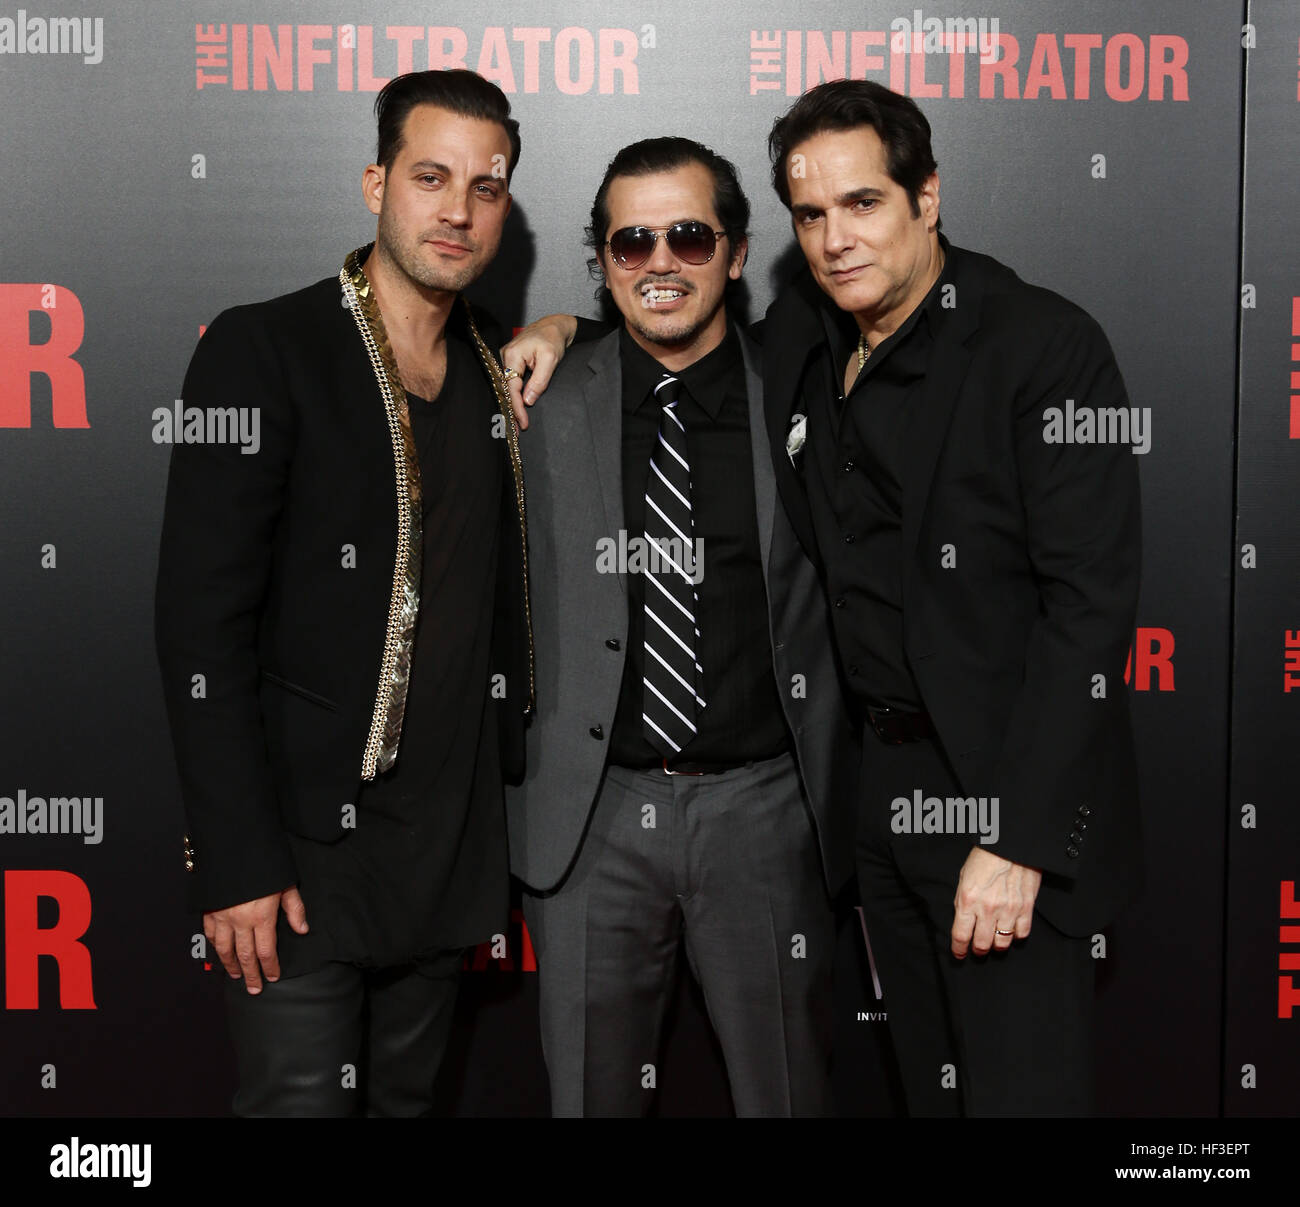 Brad Furman, John Leguizamo and Yul Vasquez attend 'The Infiltrator' premiere at AMC Loews Theater on July 11, 2016 in New York. Stock Photo